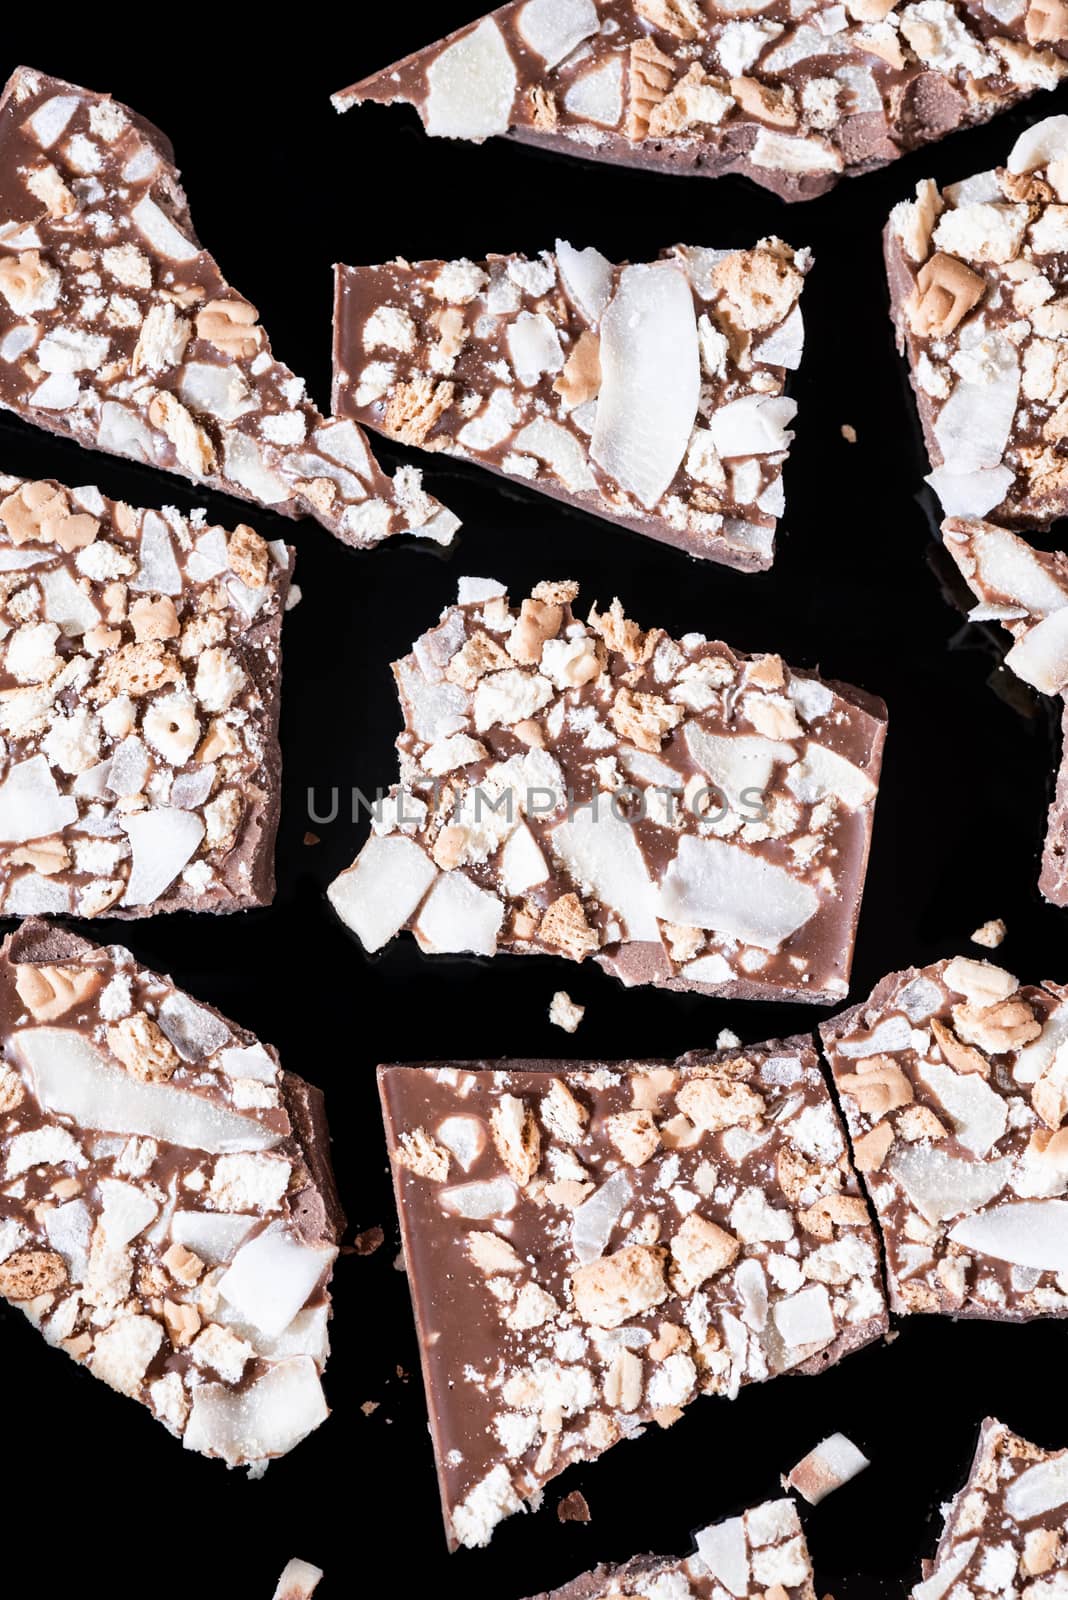 Broken Pieces of Chocolate Bar on Dark Background. Close Up View by merc67